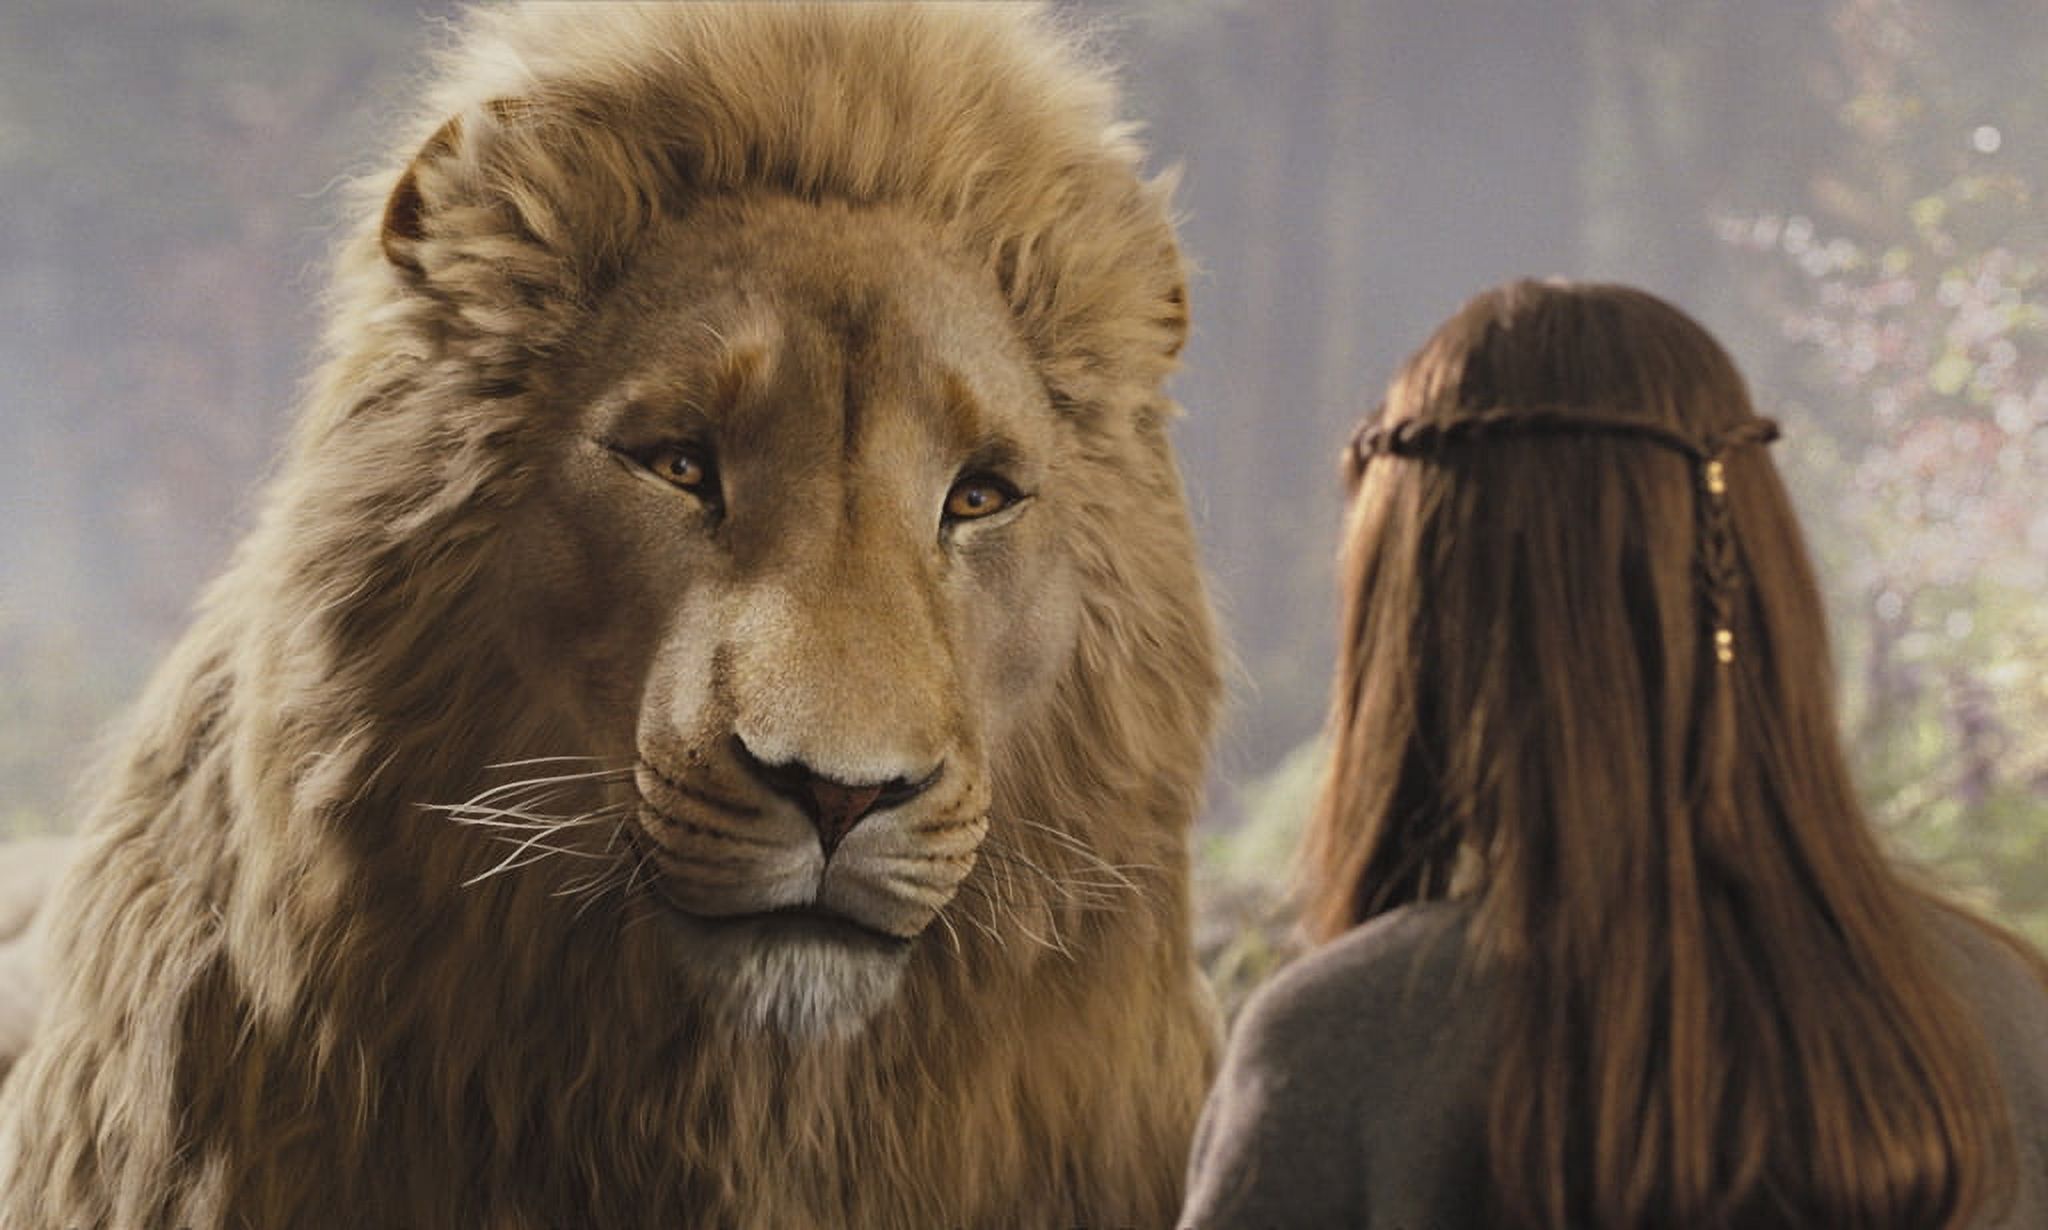 The Chronicles of Narnia: Prince Caspian (Blu-ray + DVD) - image 4 of 6